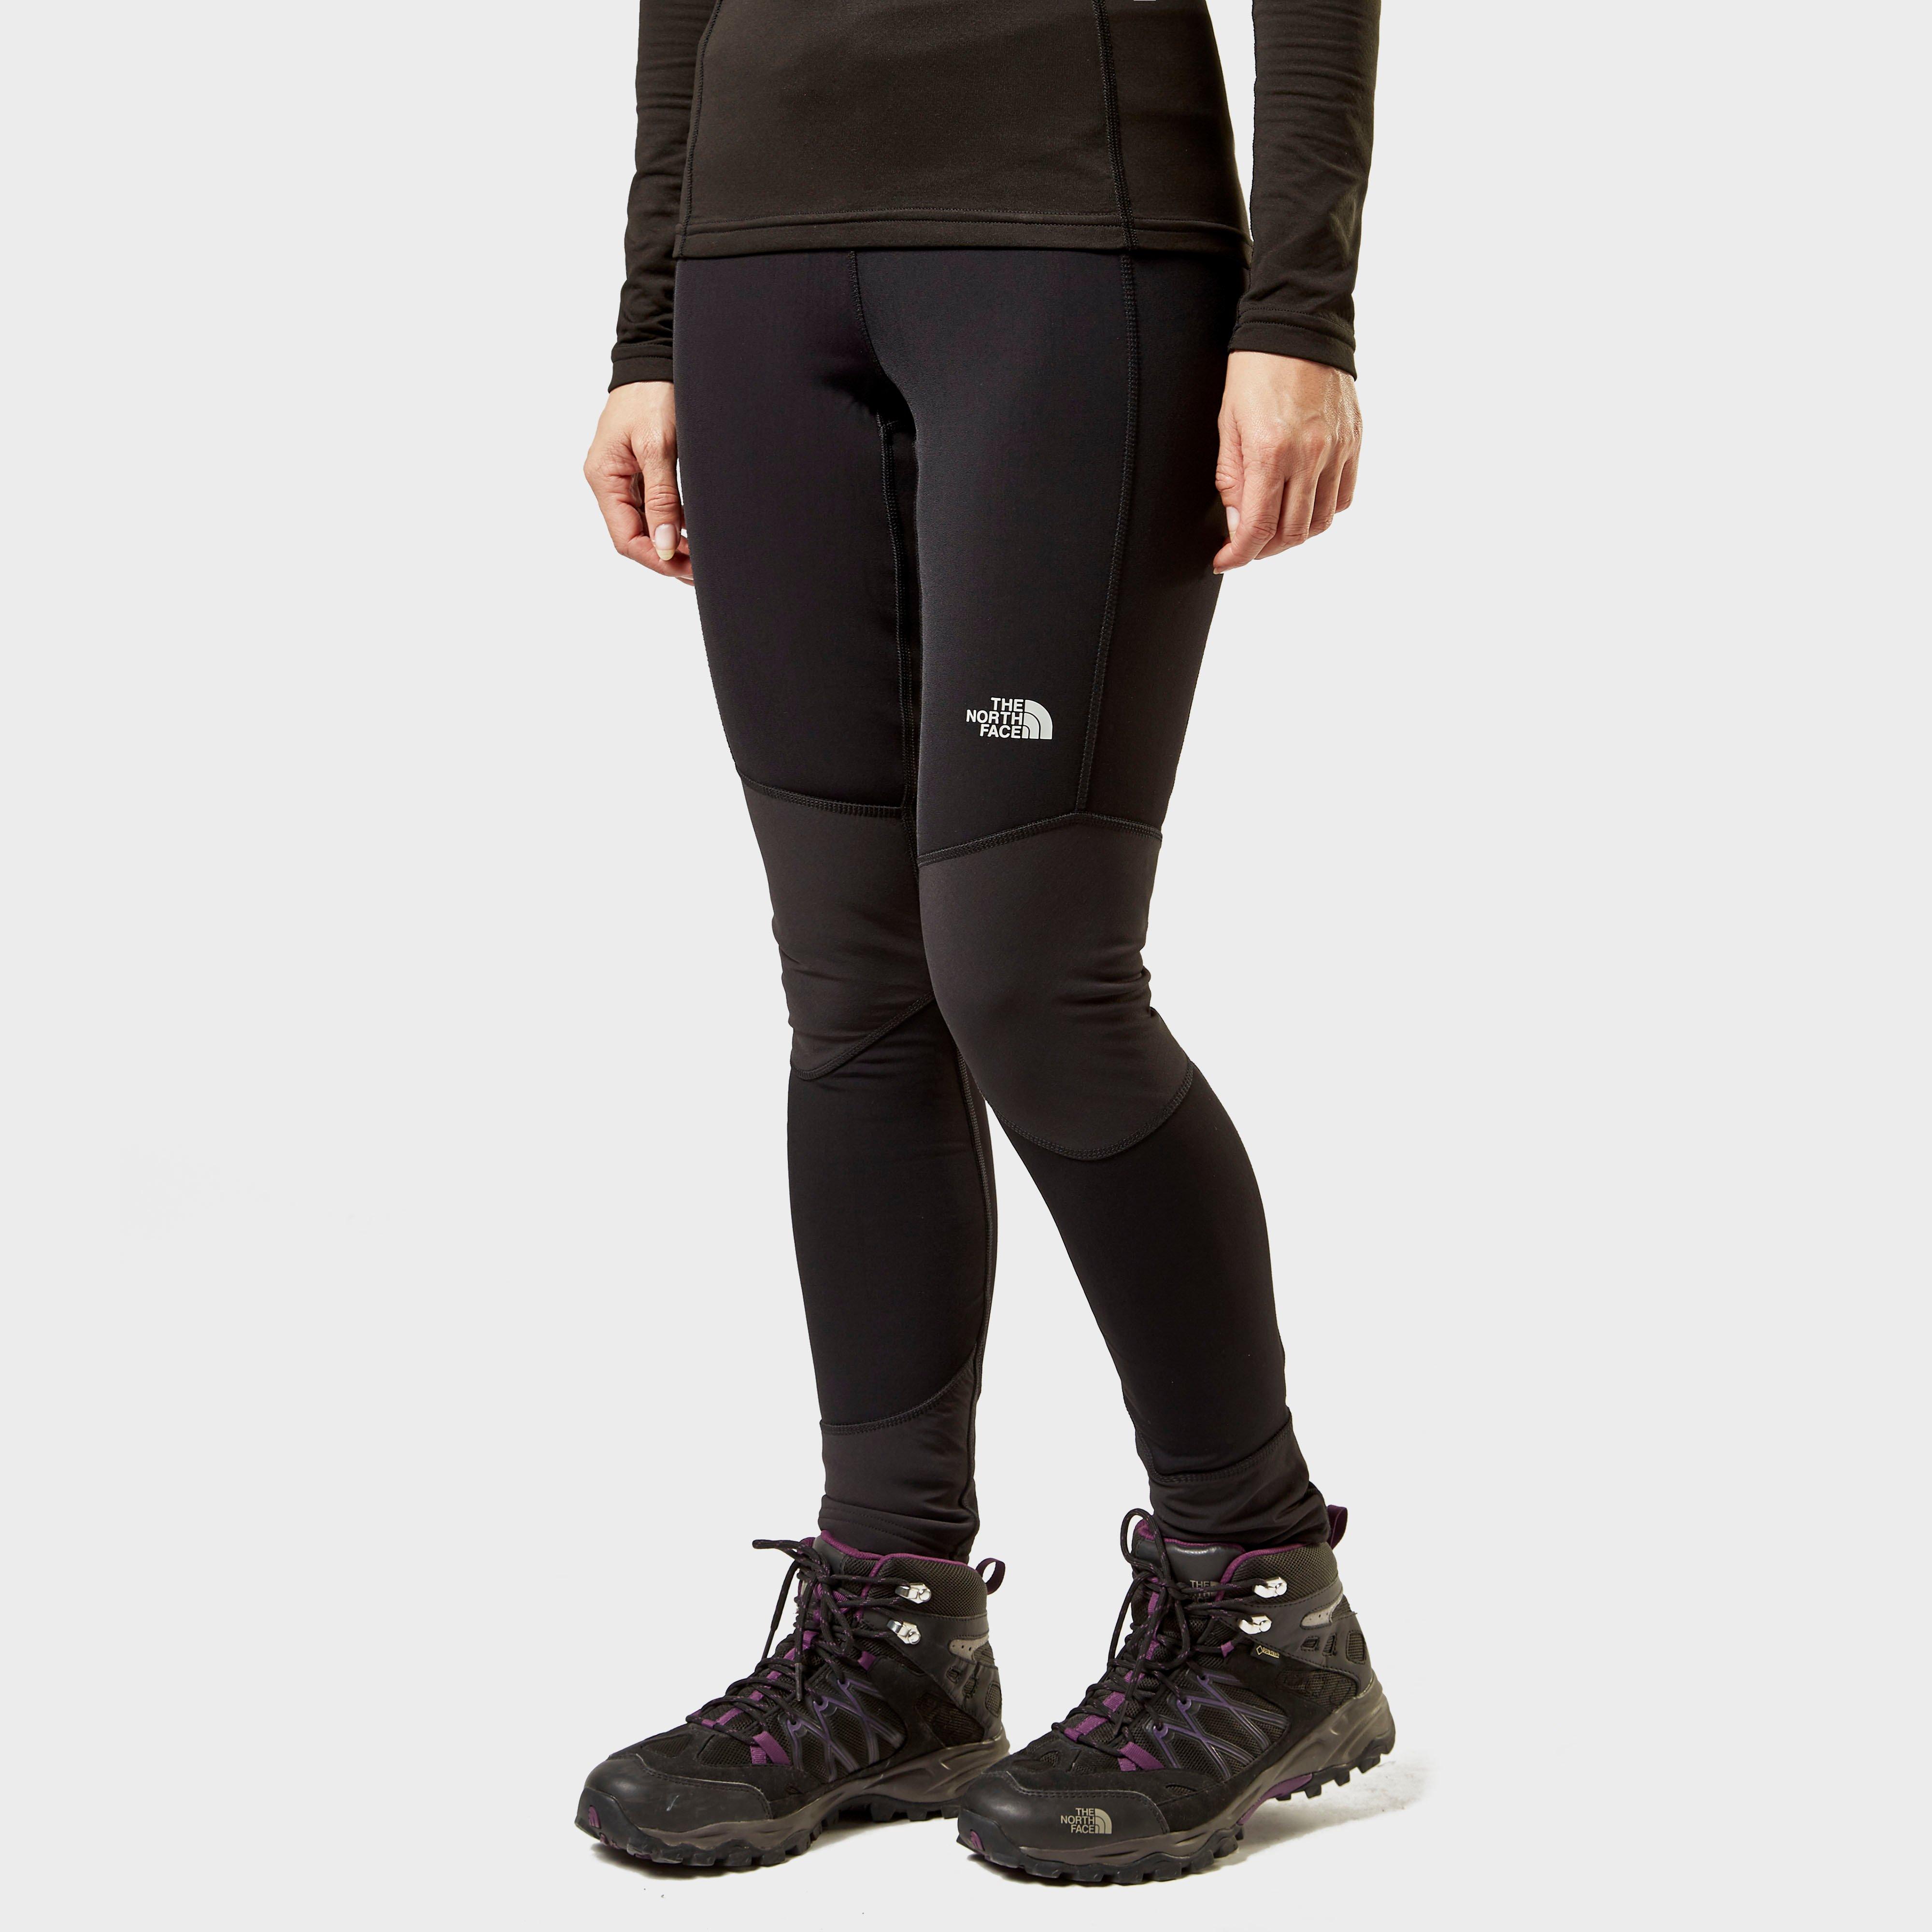 north face inlux tights